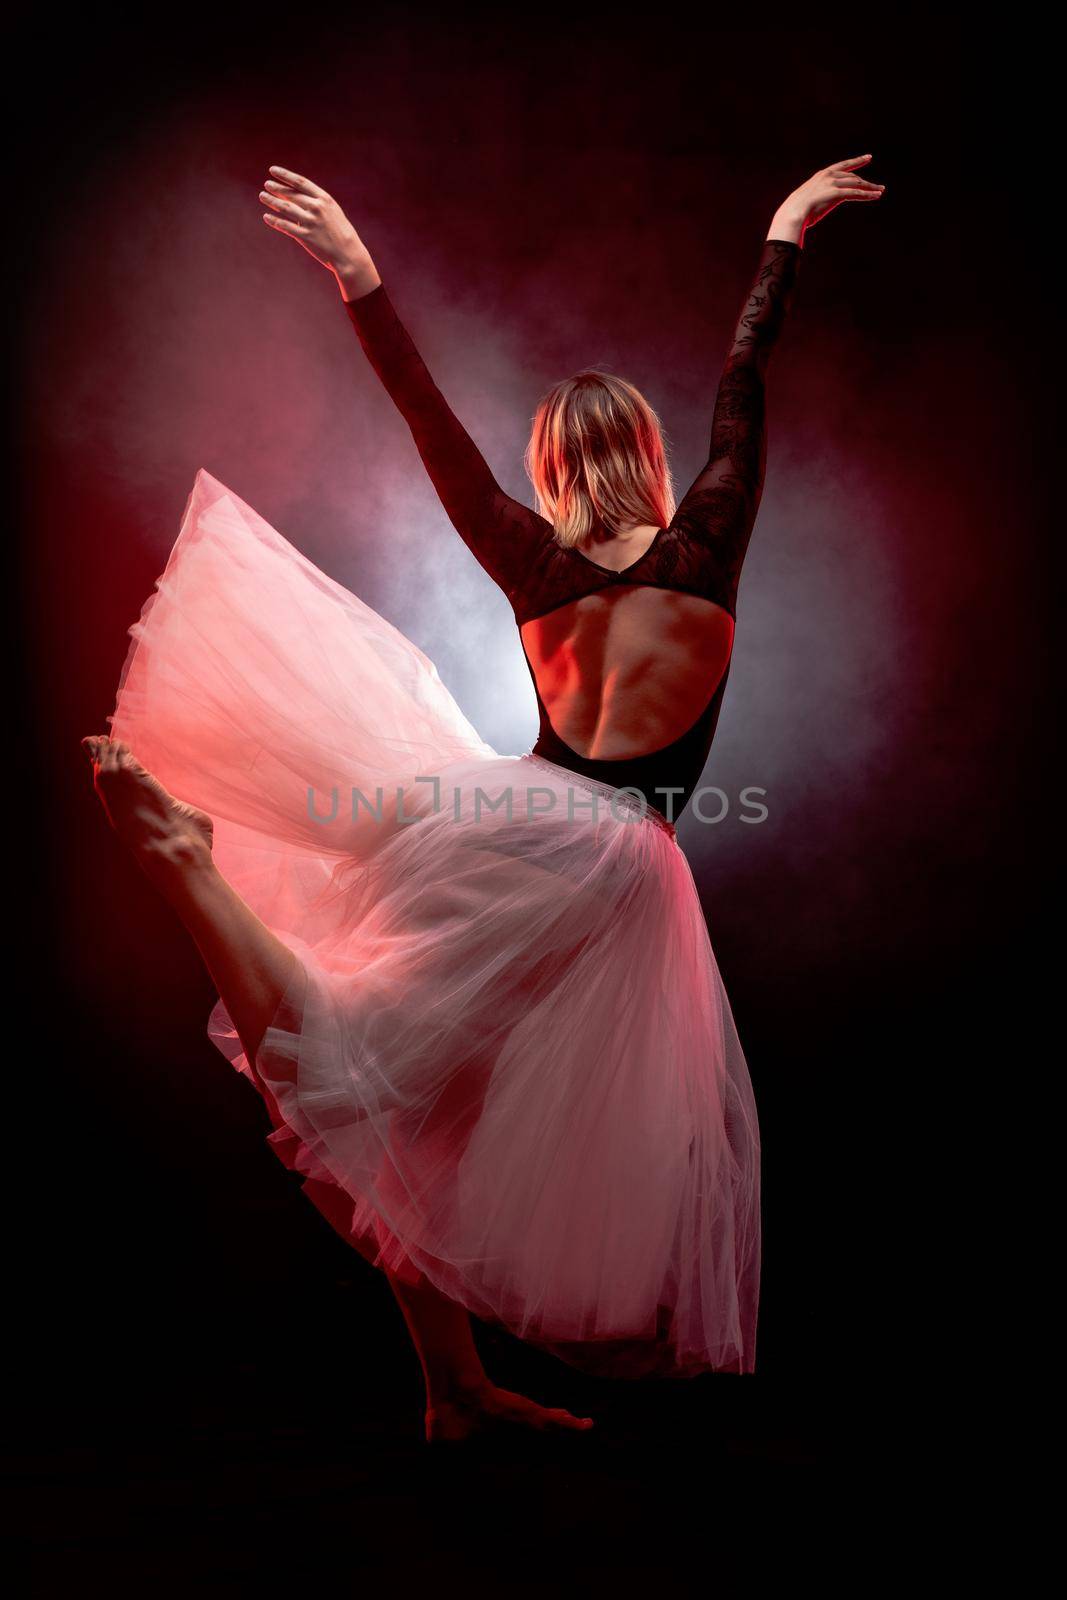 ballerina with a white dress and black top posing on red smoke background by kokimk